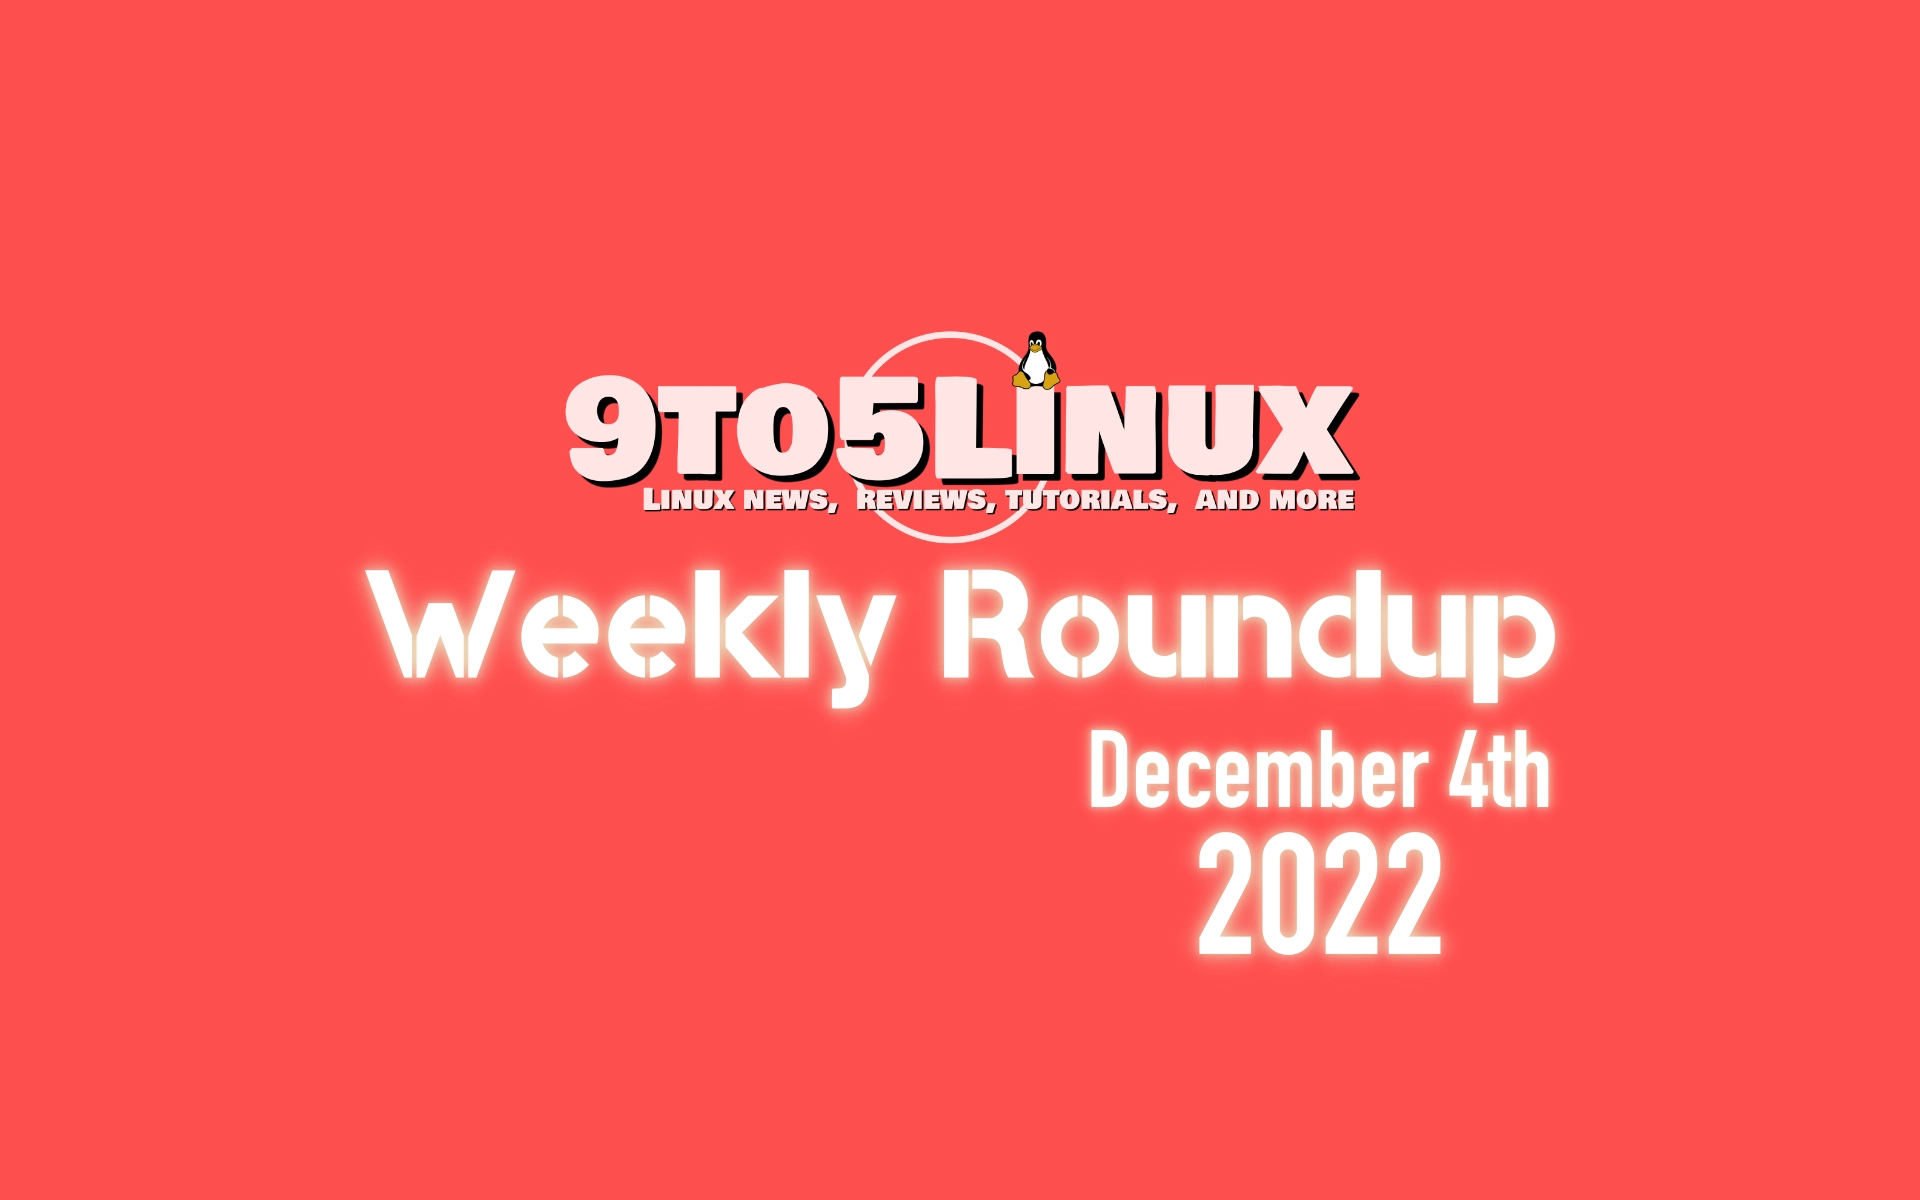 9to5Linux Weekly Roundup: December 4th, 2022